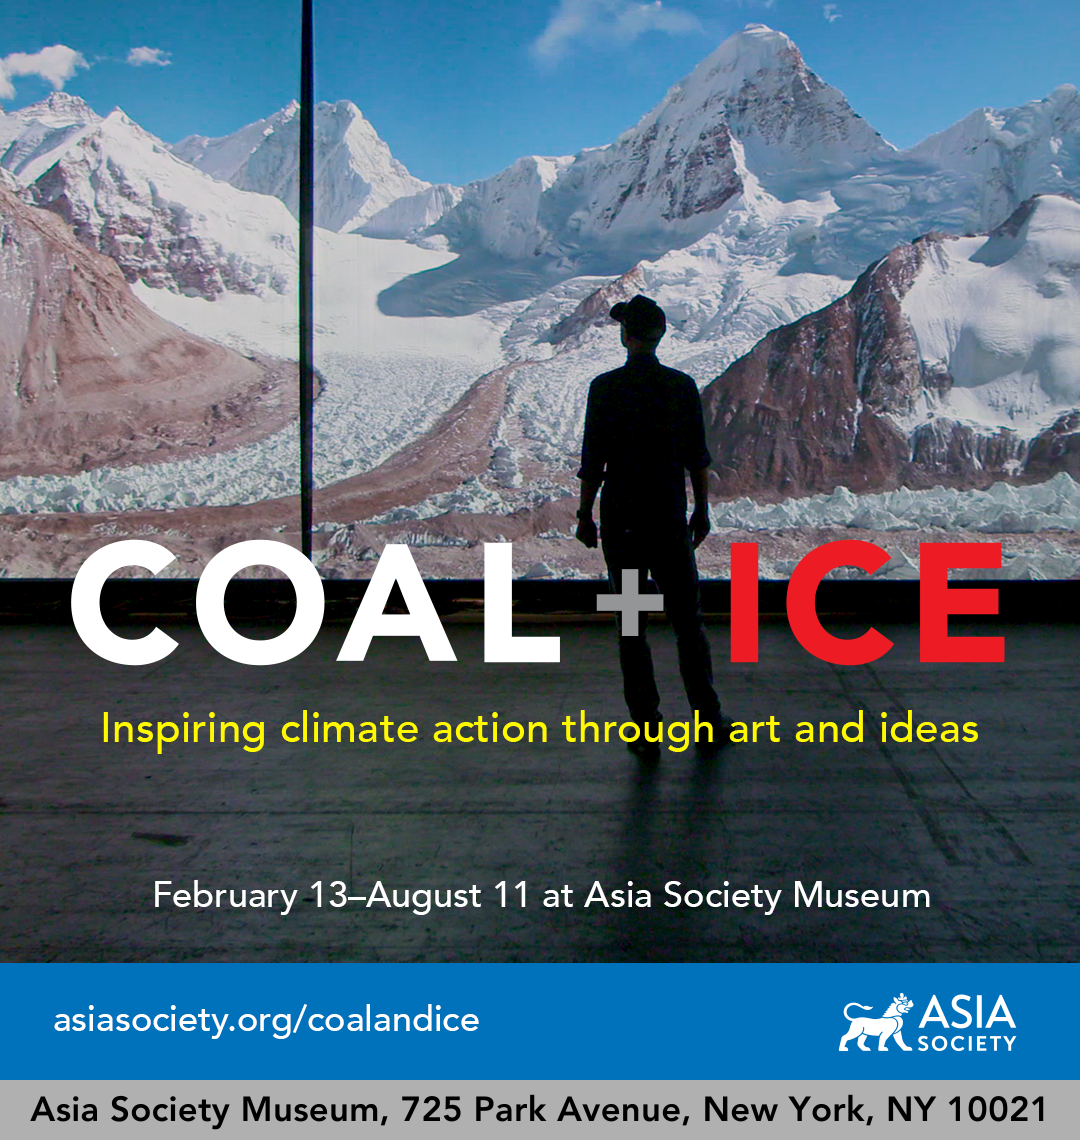 COAL + ICE Opens at Asia Society in New York City